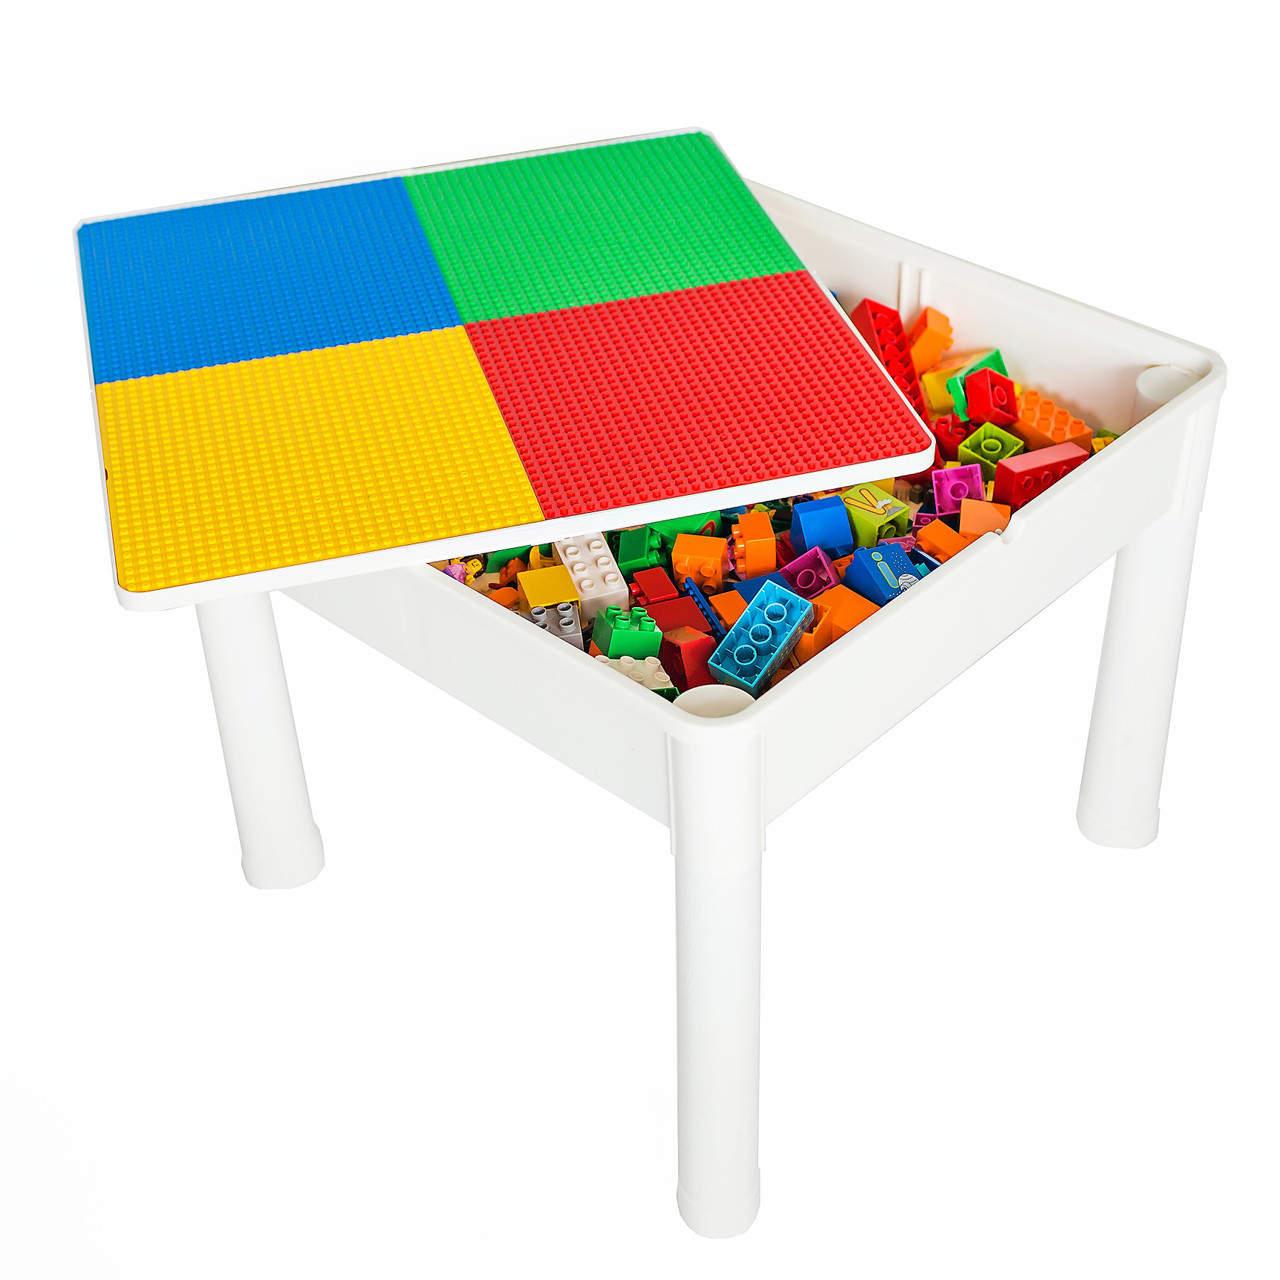 Lego Table Kids 4 in 1 Play & Build Table Set For Indoor Activity, Outdoor  Water Play, Toy Storage & Building Block Fun Compatible w/Lego & Duplo 